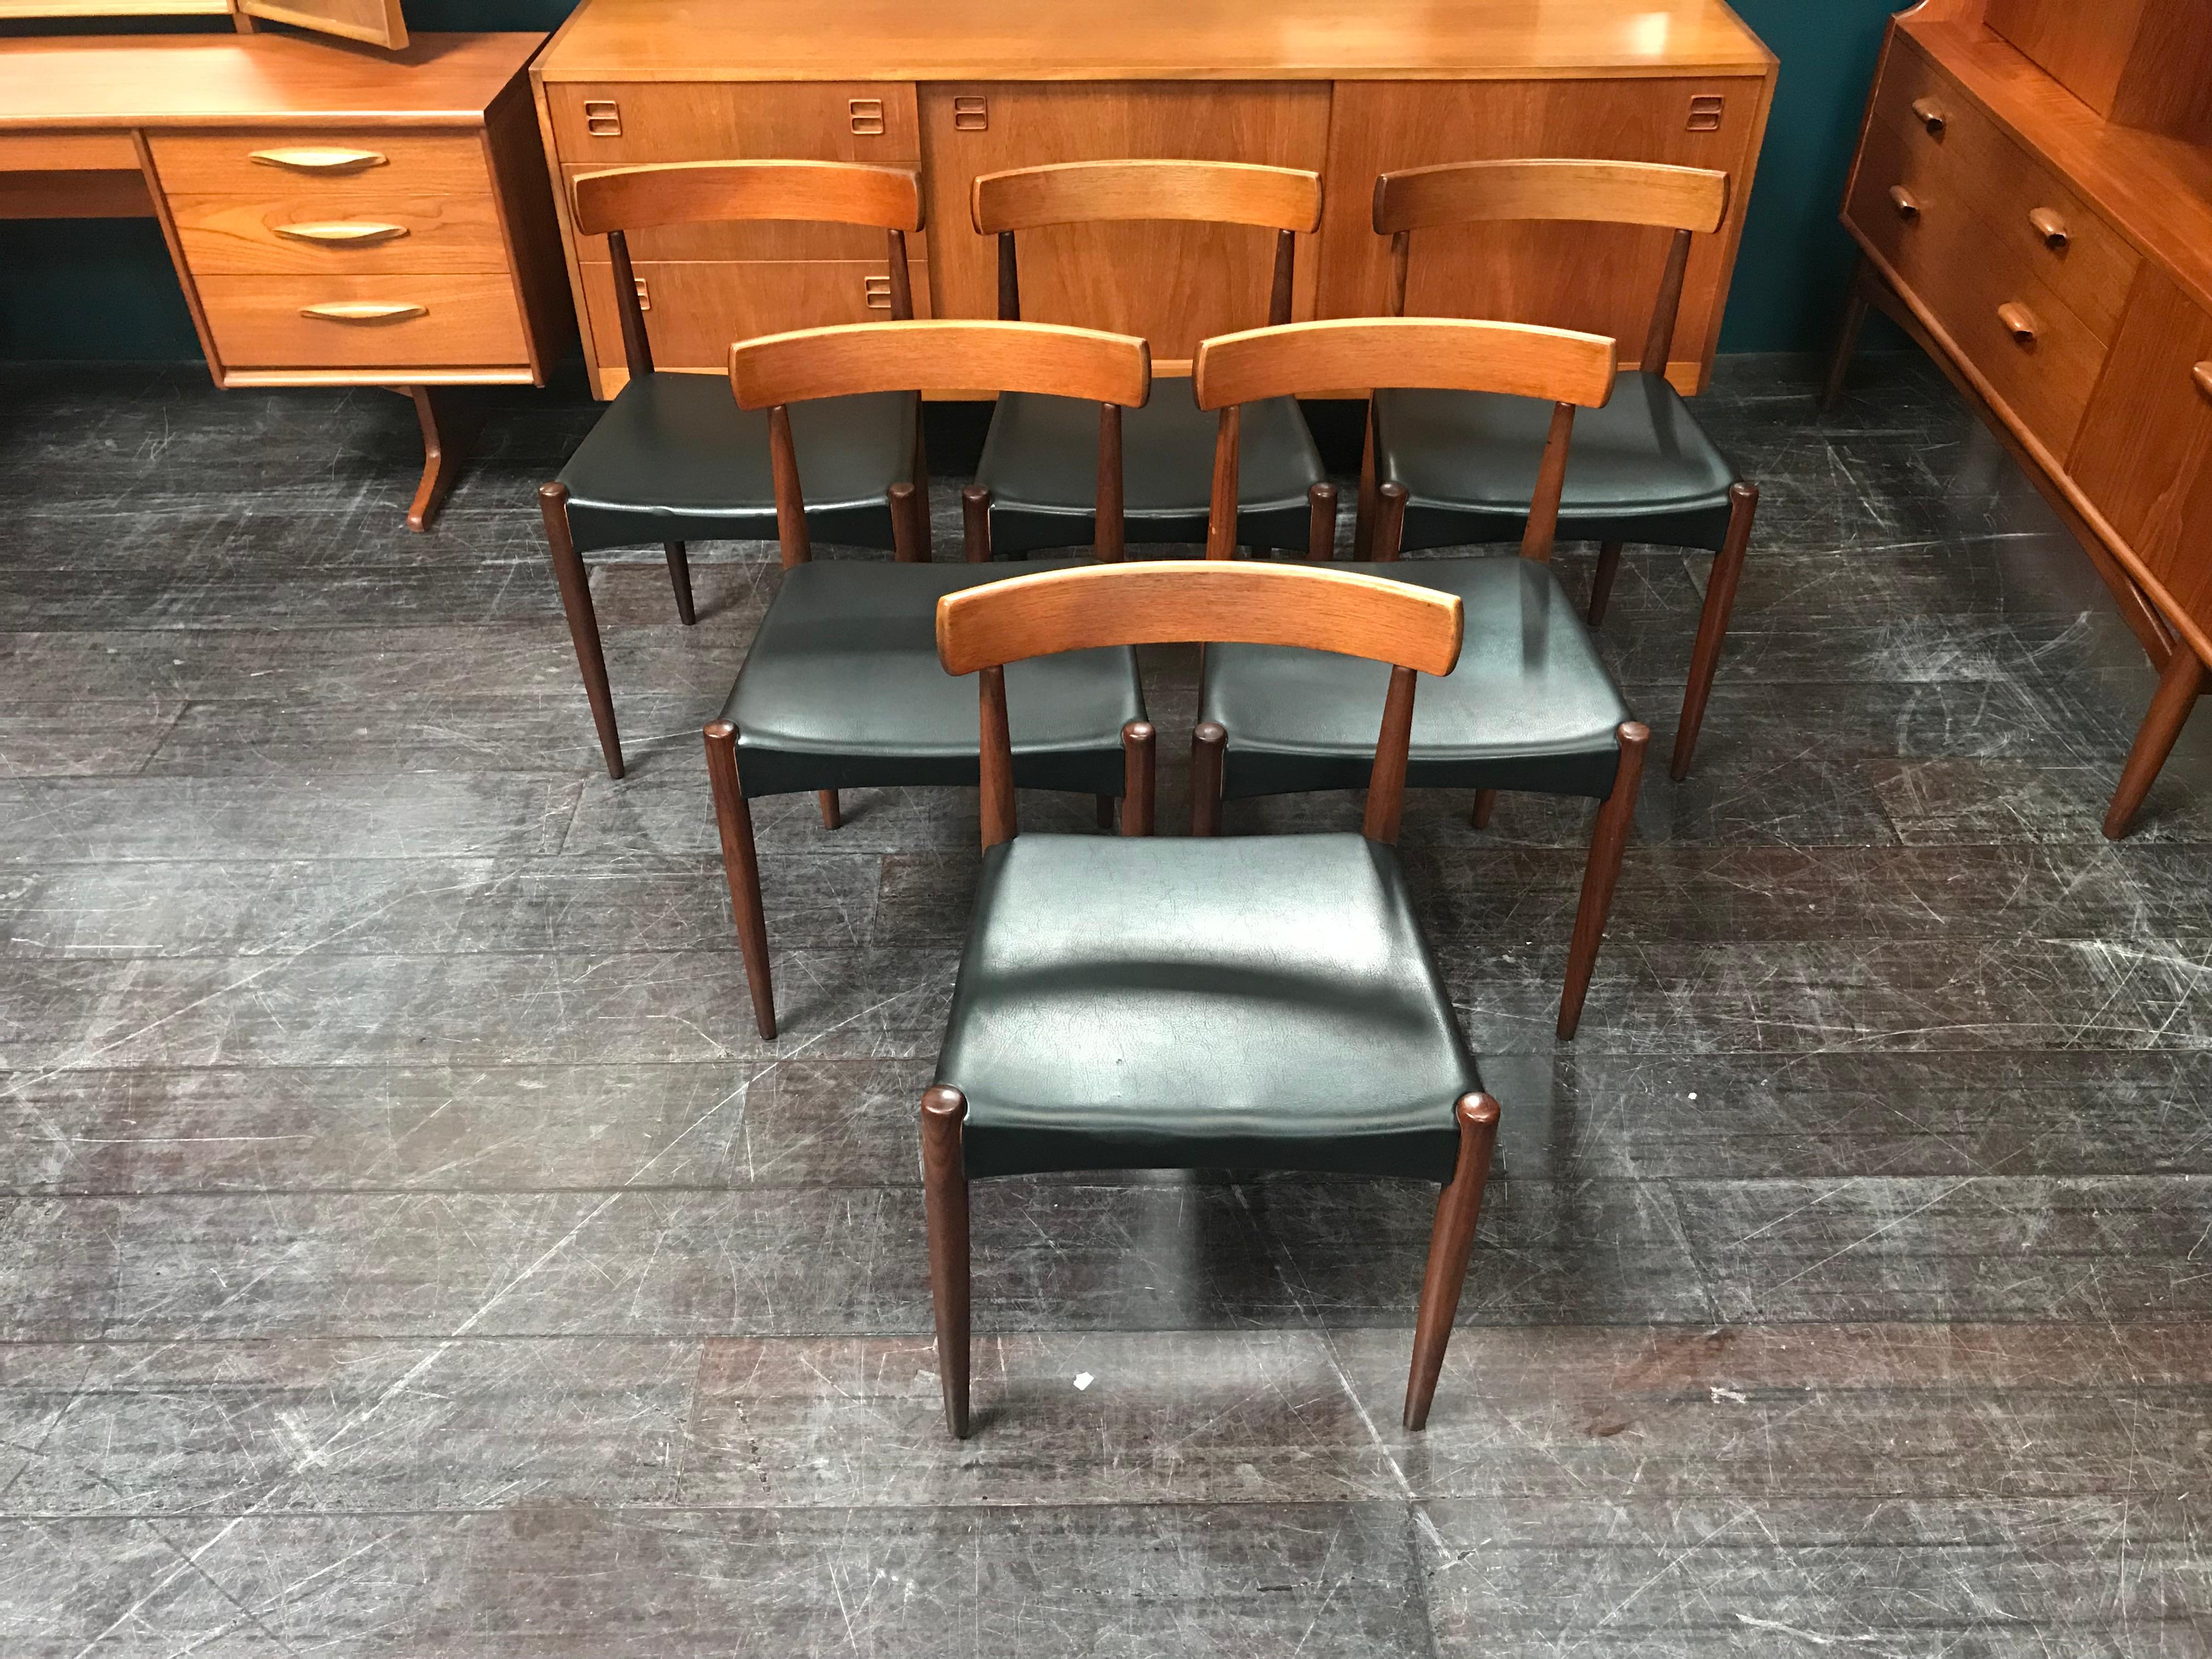 A stunning set of six Hovmand Olsen chairs with black vinyl seat pads. These elegant dining chairs were designed for the Danish manufacturer Mogens Kold and are made from teak.

Danish furniture designer Arne Hovmand-Olsen was born in Kirkeby Sogn